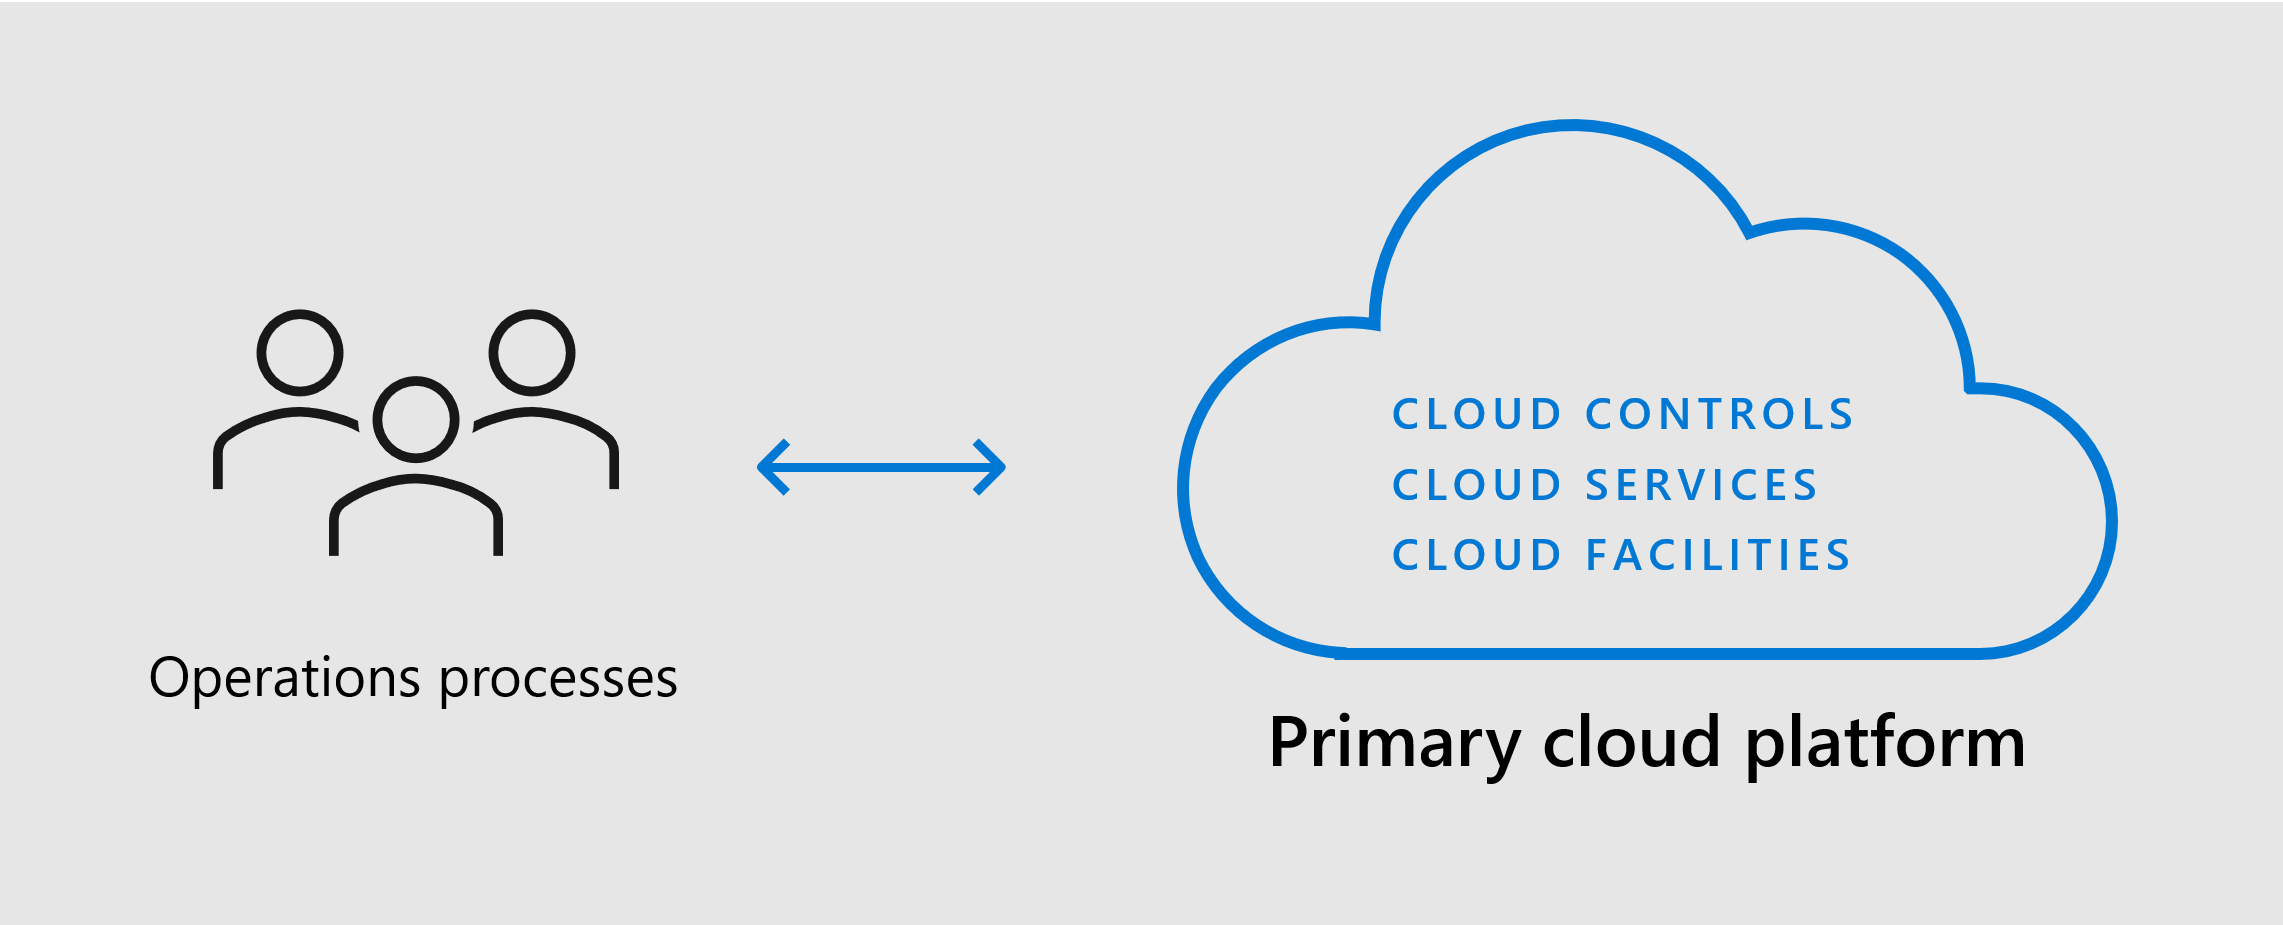 Diagram that shows the primary cloud platform with facilities, services, and controls to support your processes.